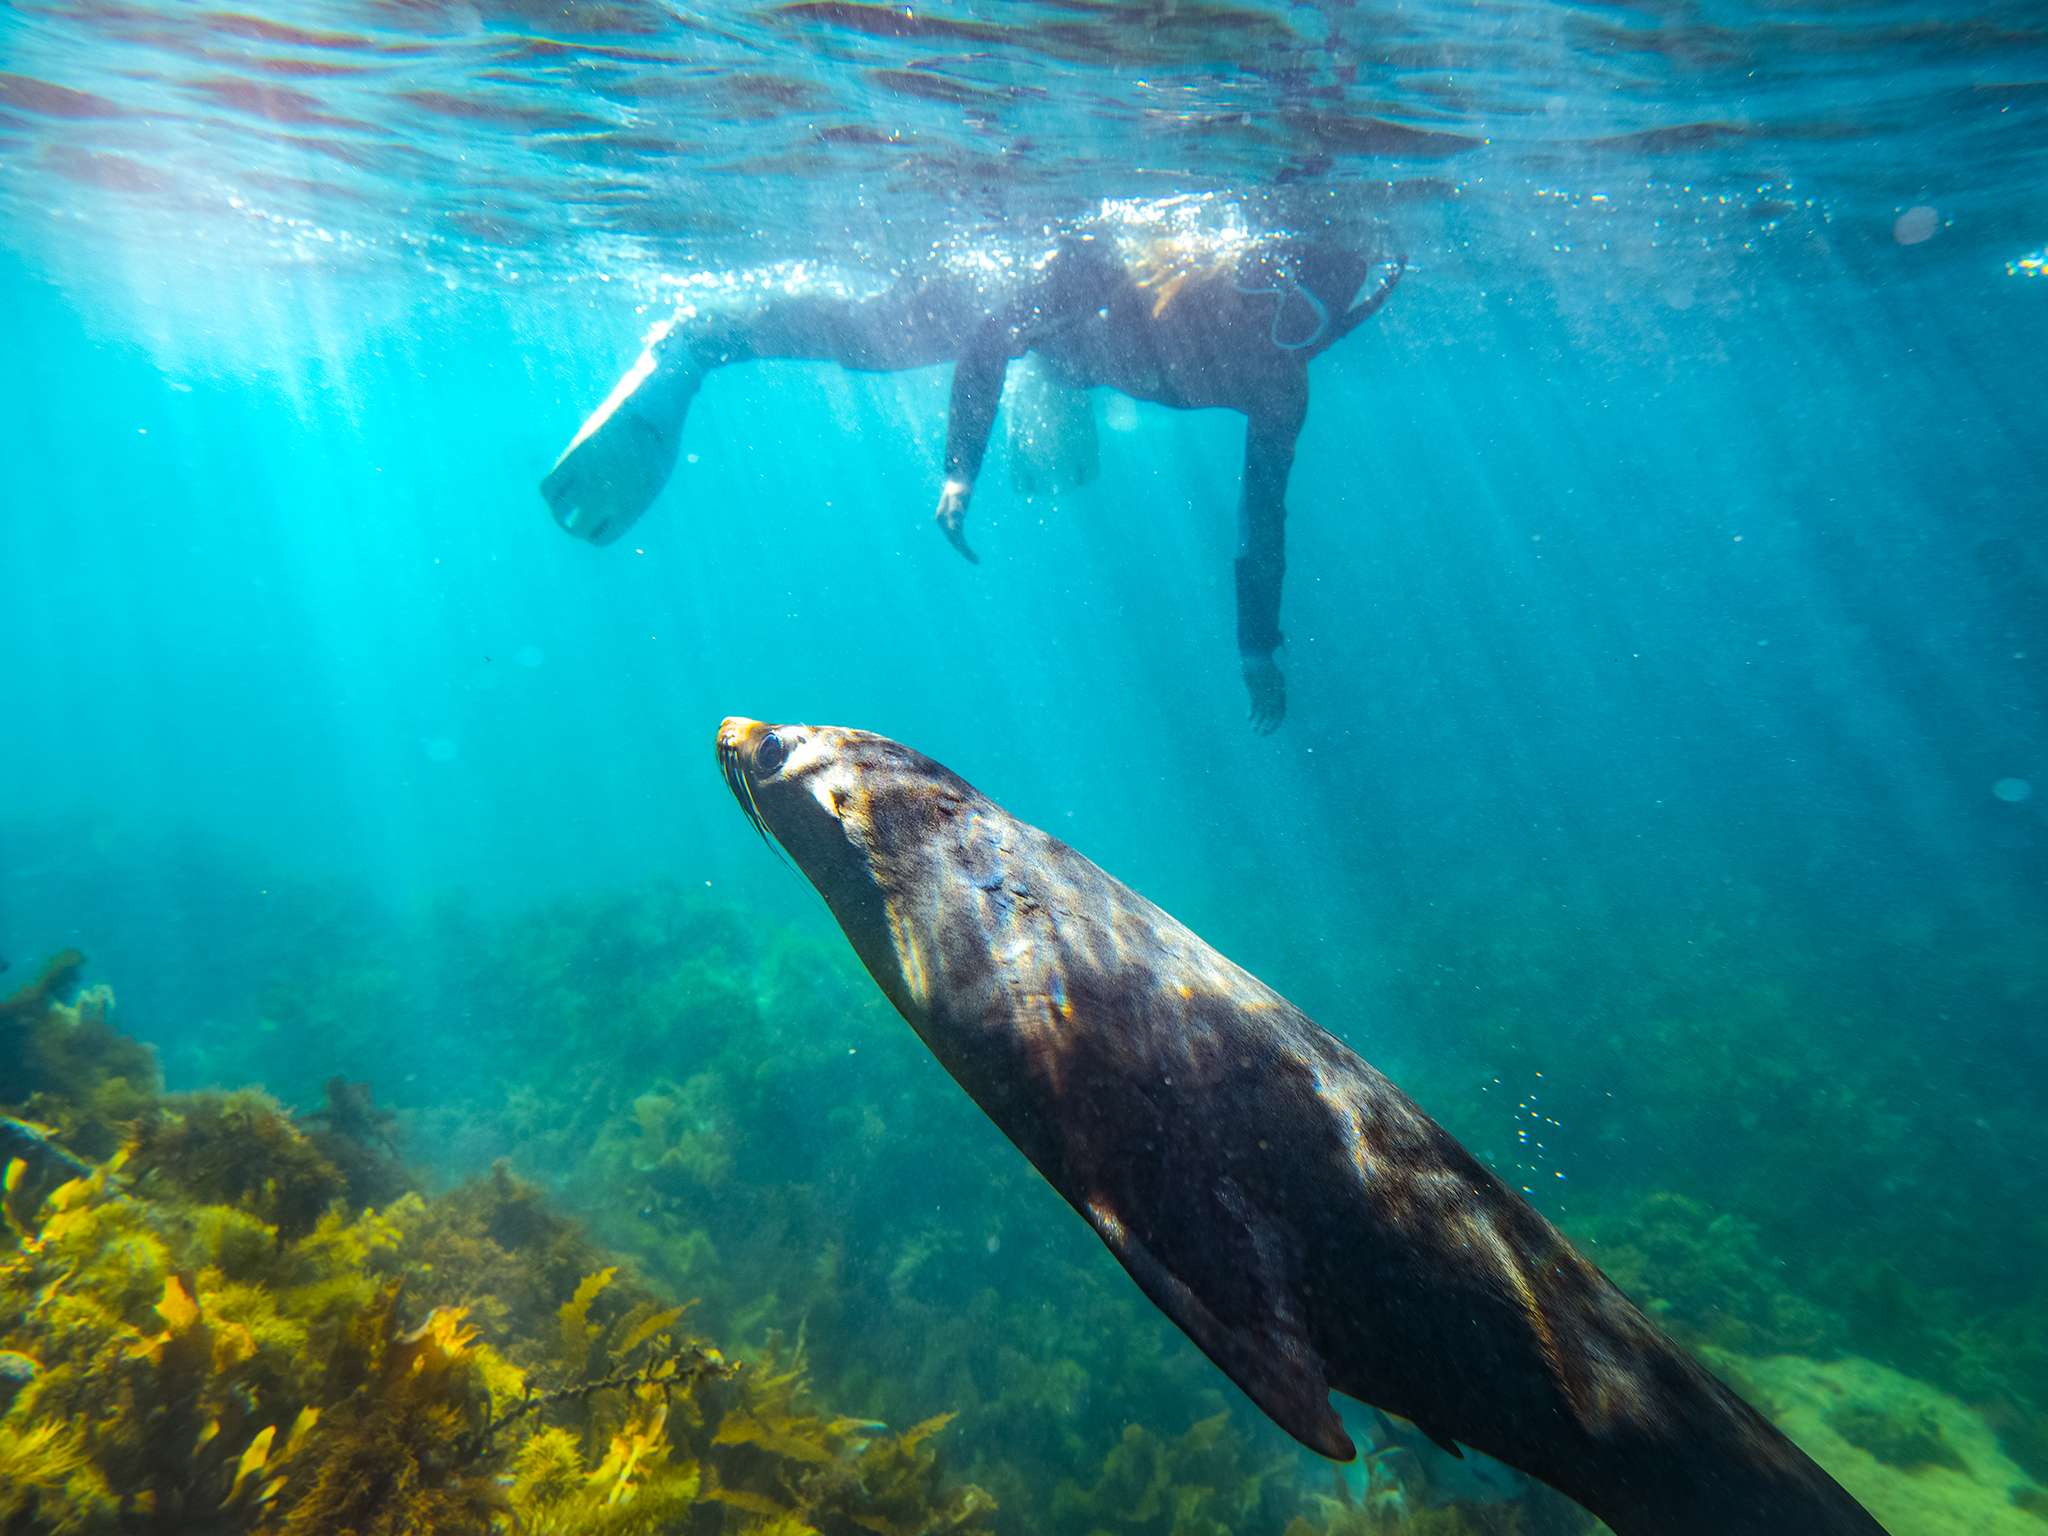 Private Snorkelling Charter - Swim with Seals/Dolphins/Coastal Snorkel